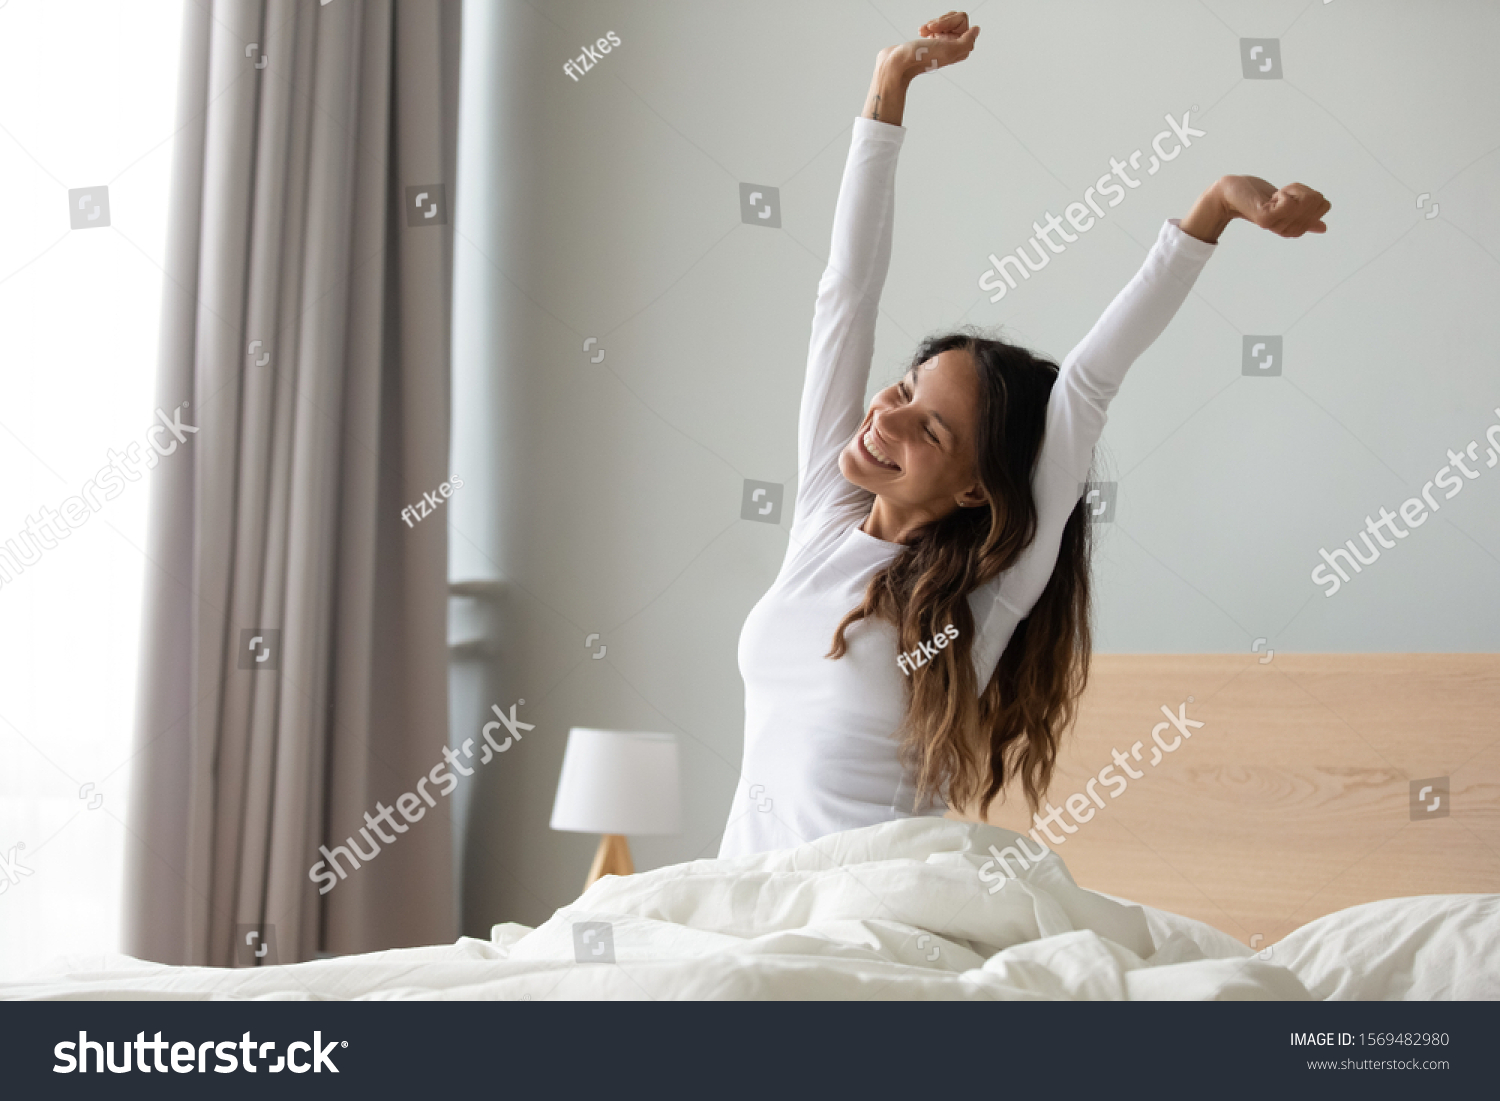 Happy woman in white nightwear sitting in bed awakened from enough and healthy sleep feels good, stretching her arms muscles after sleep and long immobility wakes up start new day with smile concept #1569482980